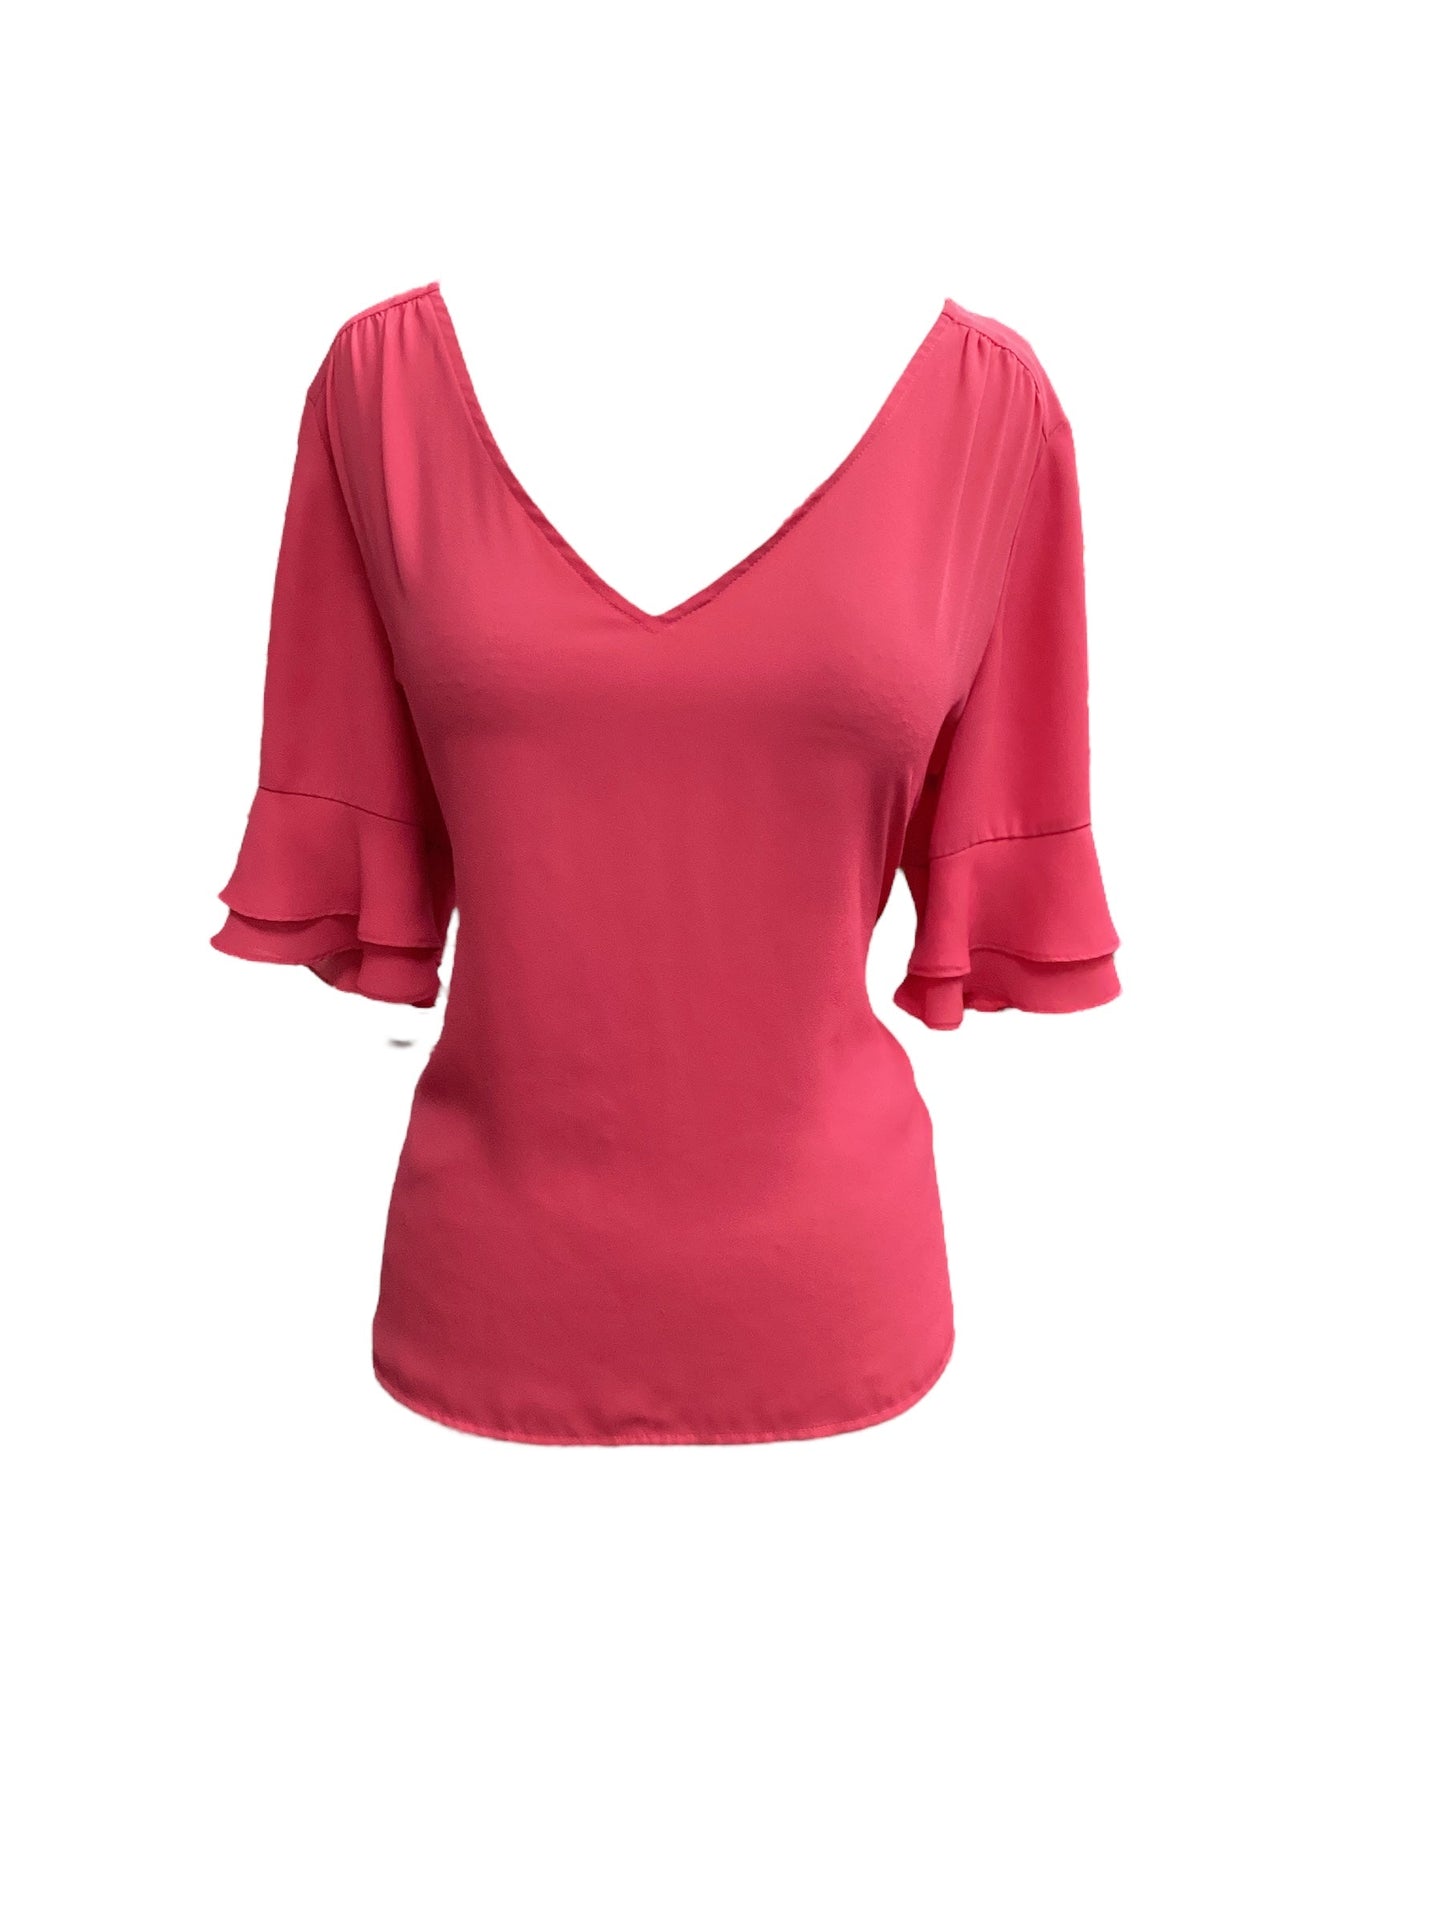 Pink Top Short Sleeve New York And Co, Size L